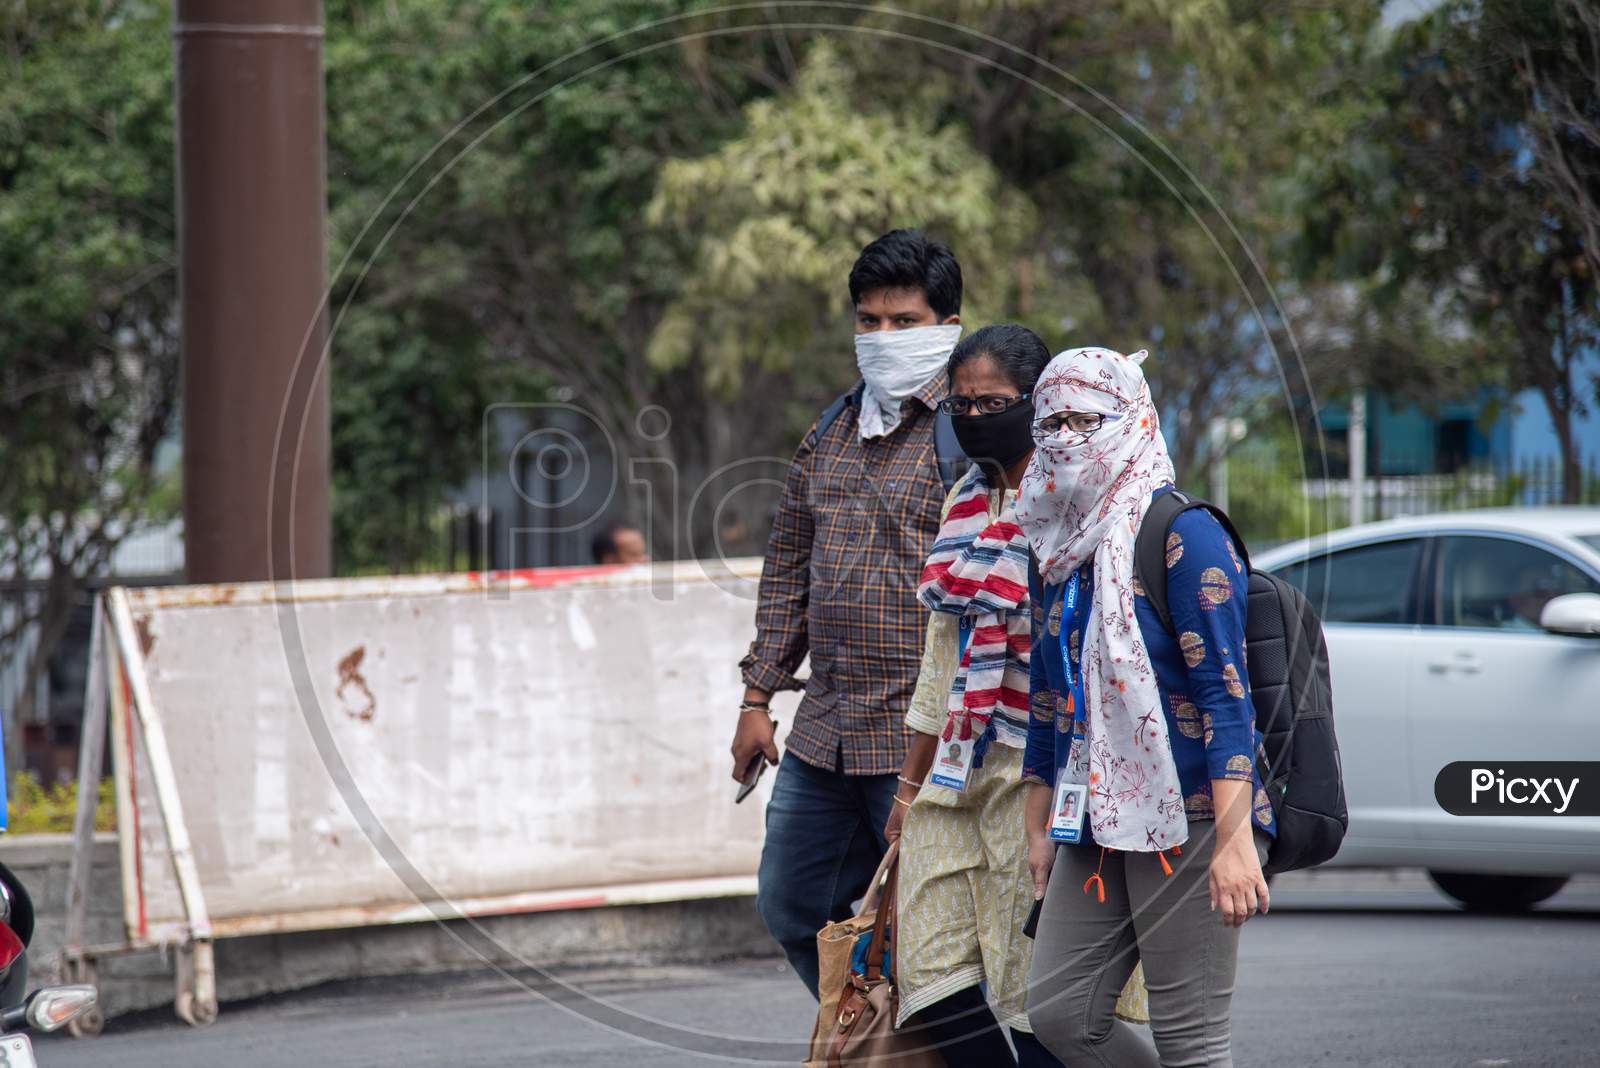 Employees wear preventive Face Masks to protect themselves from the Pandemic CoVID19, Corona Virus after the breakout of the news that an employee from Mindspace Building 20 is tested Positive.